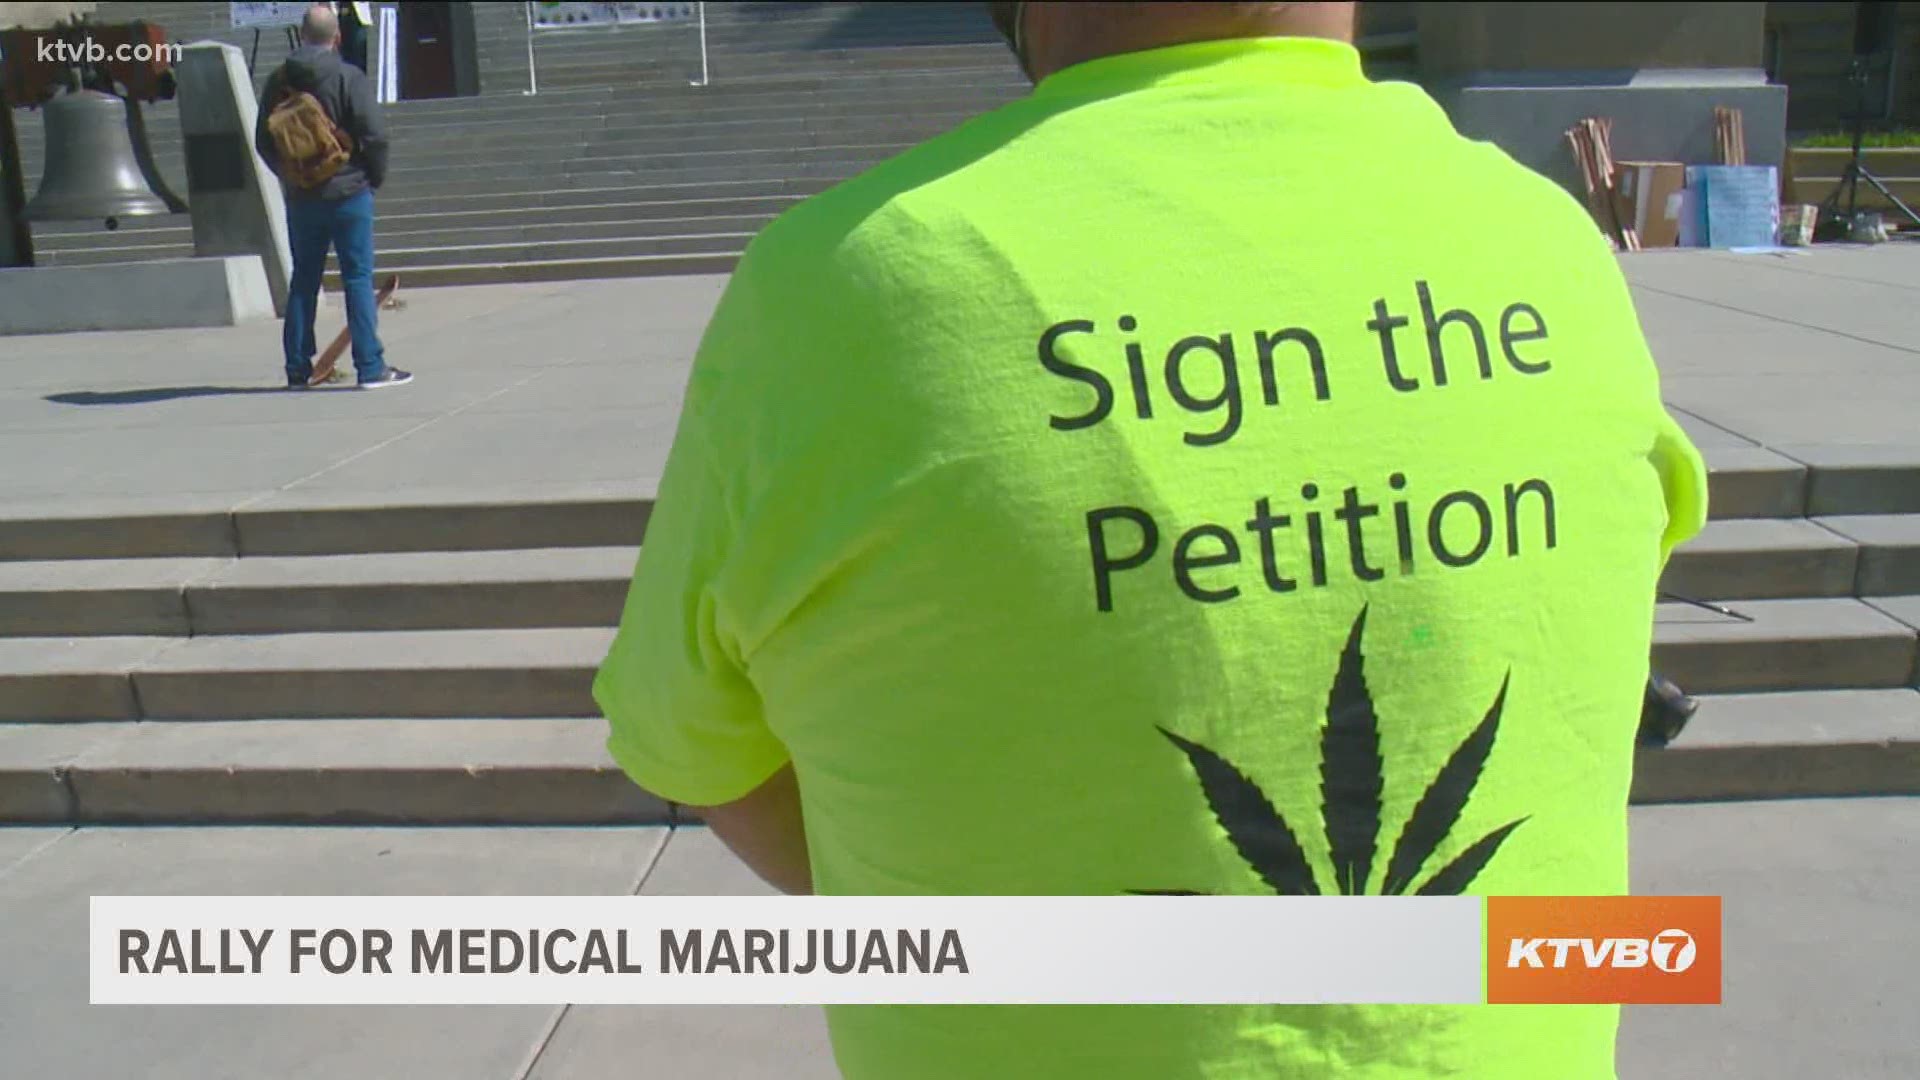 The goal of the rally is to bring awareness to marijuana reform in the state of Idaho, specifically to get people to sign the Idaho Marijuana Act petition.